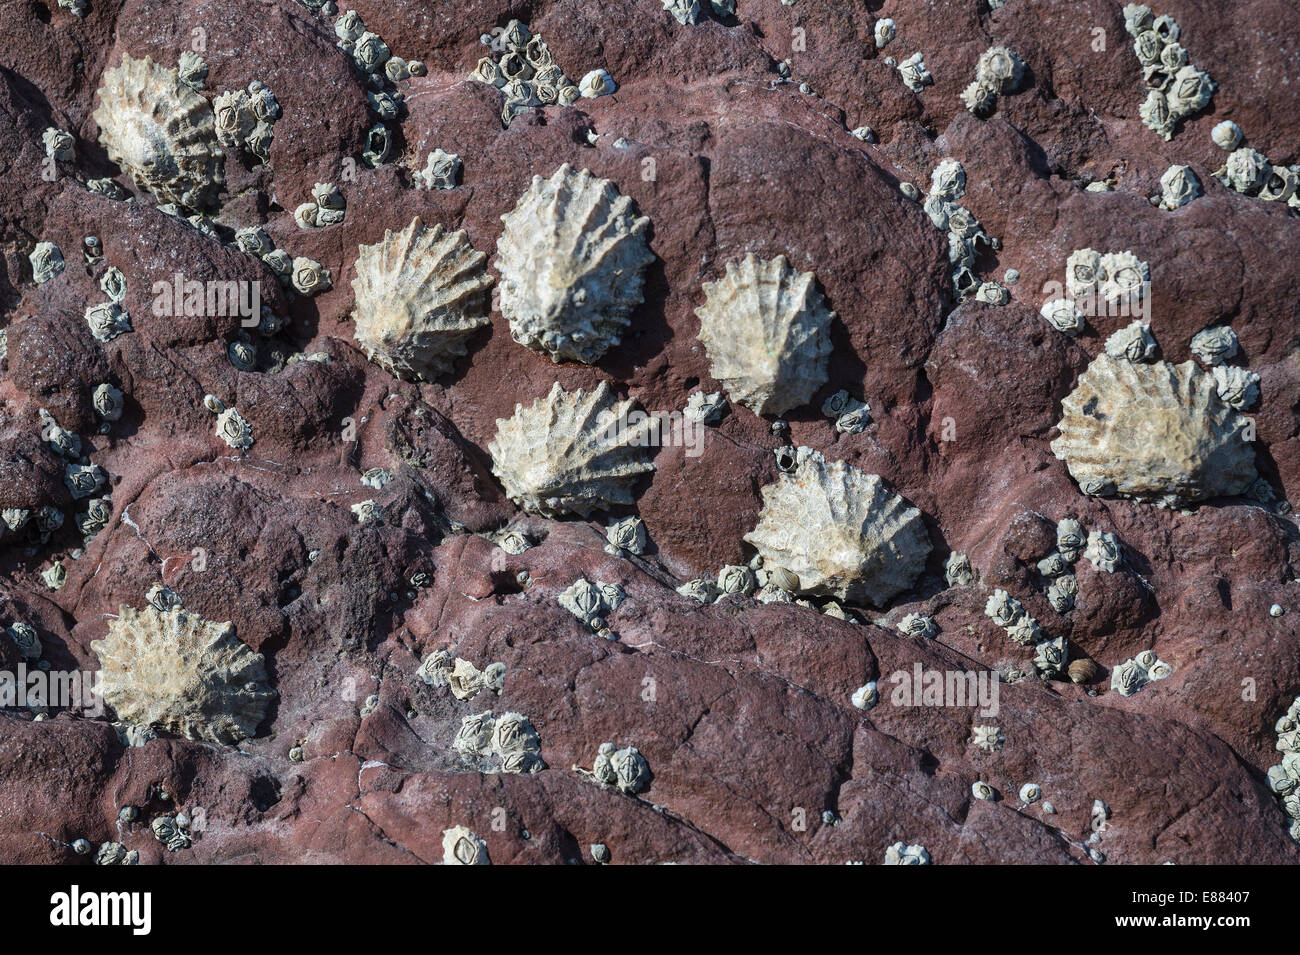 Common Limpet (Patella vulgata) and barnacles on rock Dale Ford Pembrokshire Wales UK Europe August Stock Photo